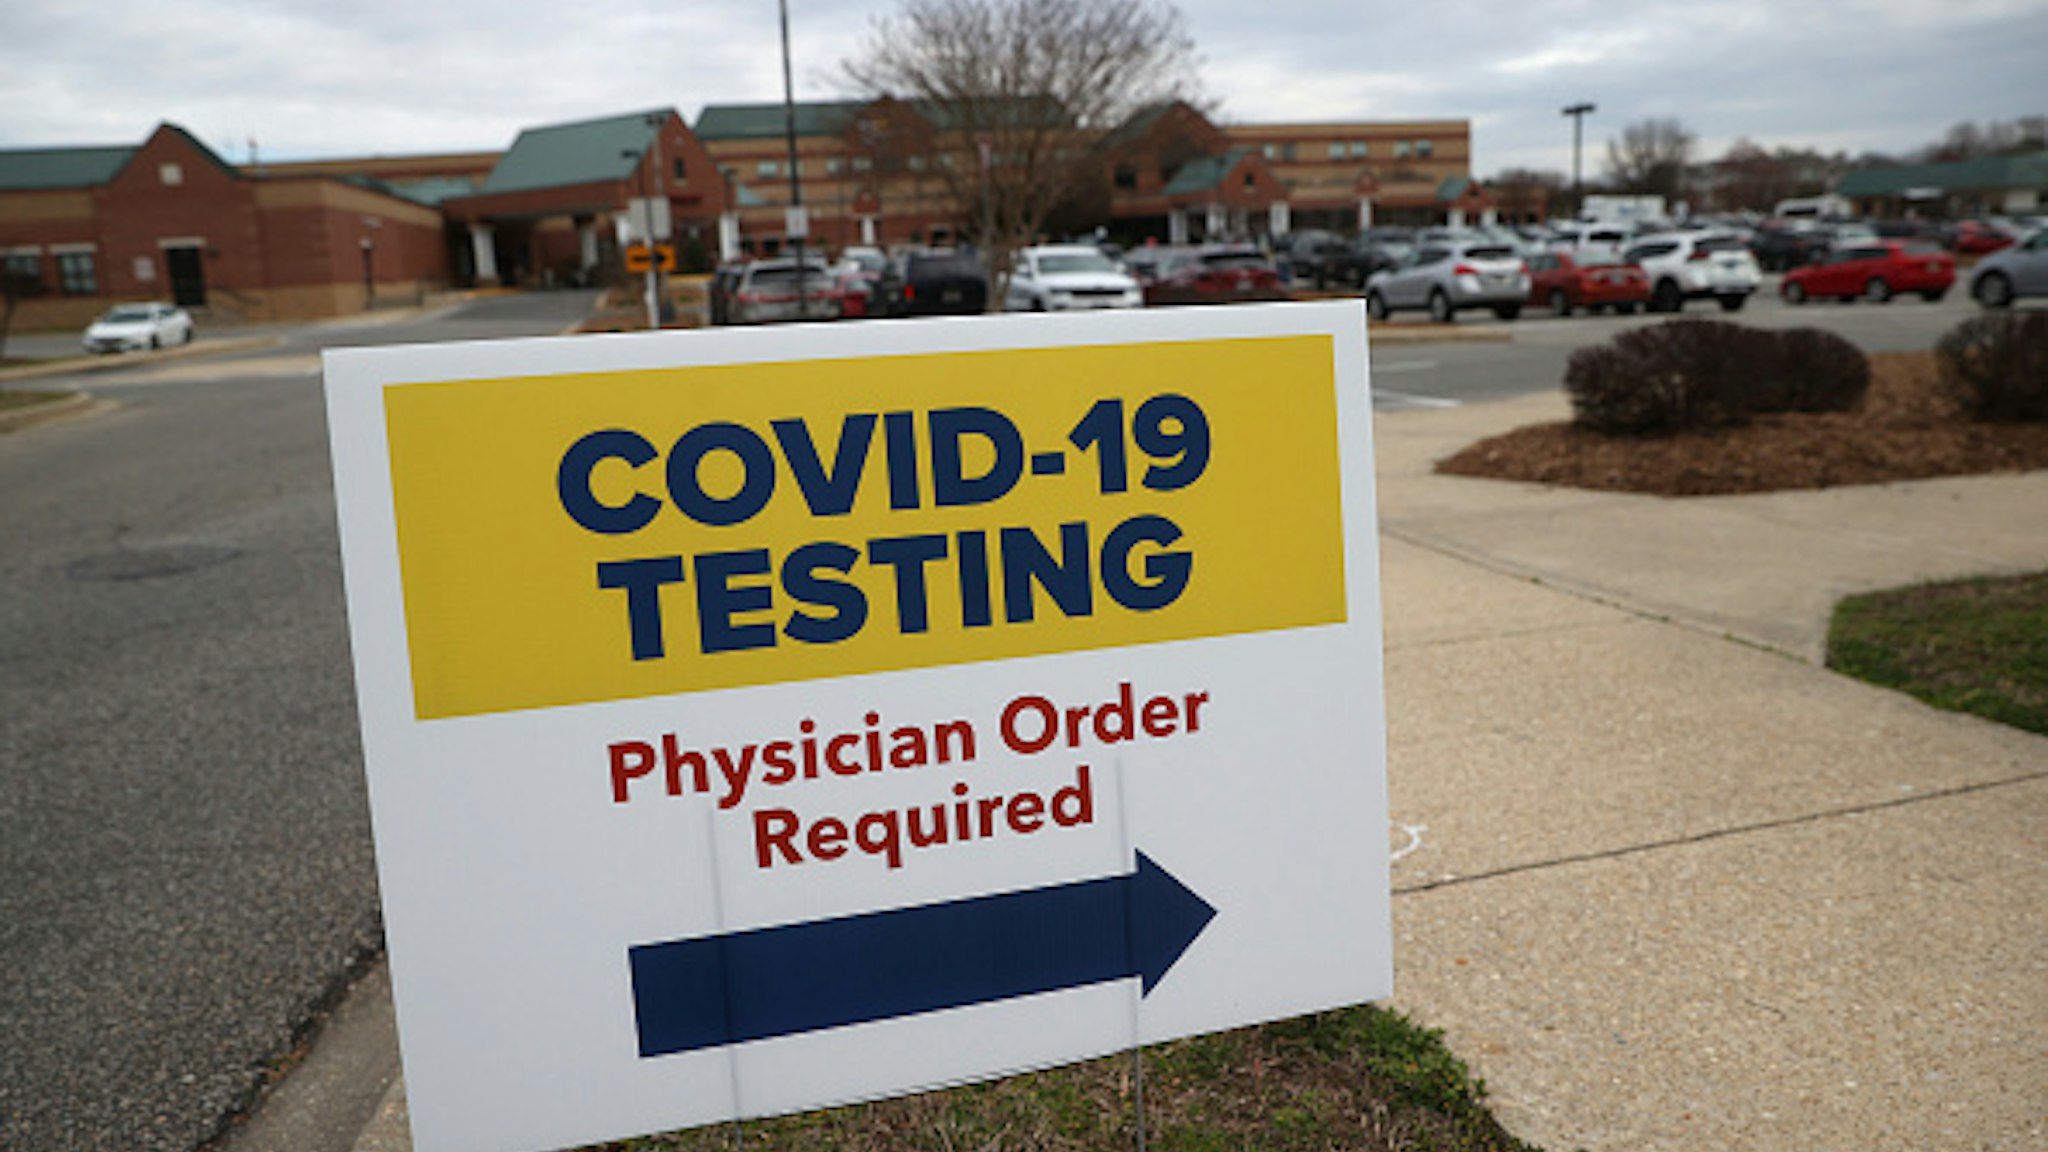 LEONARDTOWN, MARYLAND - MARCH 17: Signs directing patients to a COVID-19 virus testing drive-up location are shown outside Medstar St. Mary's Hospital on March 17, 2020 in Leonardtown, Maryland. The facility is one of the first in the Washington, DC area to offer coronavirus testing as more than 5,200 cases have been confirmed in the United States, and more than 90 deaths have been attributed to the virus.